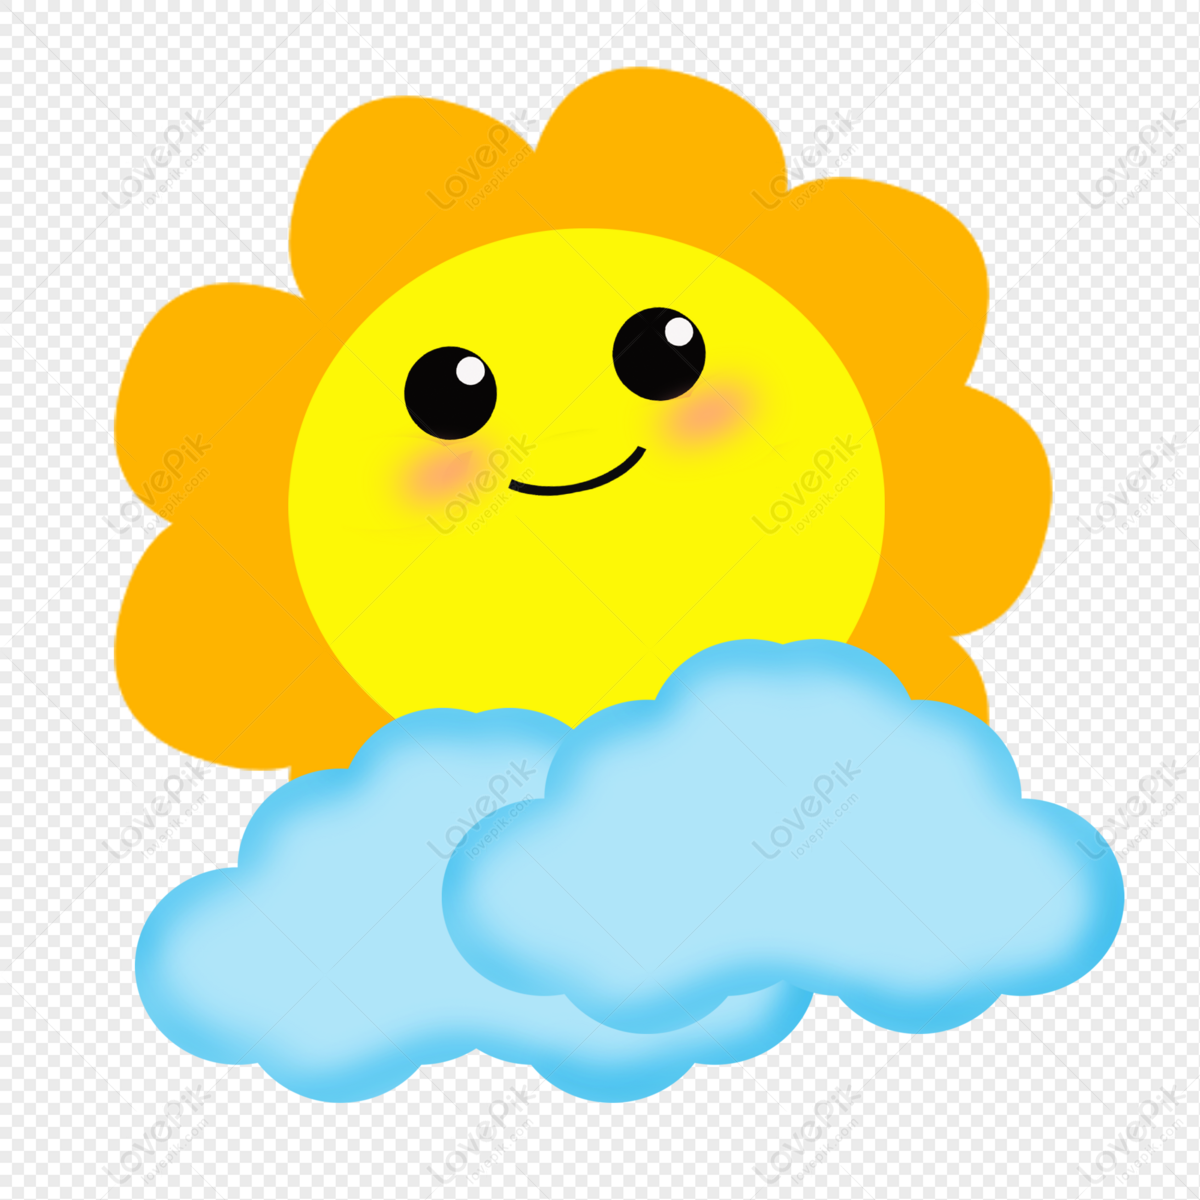 Cartoon Sun PNG Image And Clipart Image For Free Download - Lovepik |  401258388